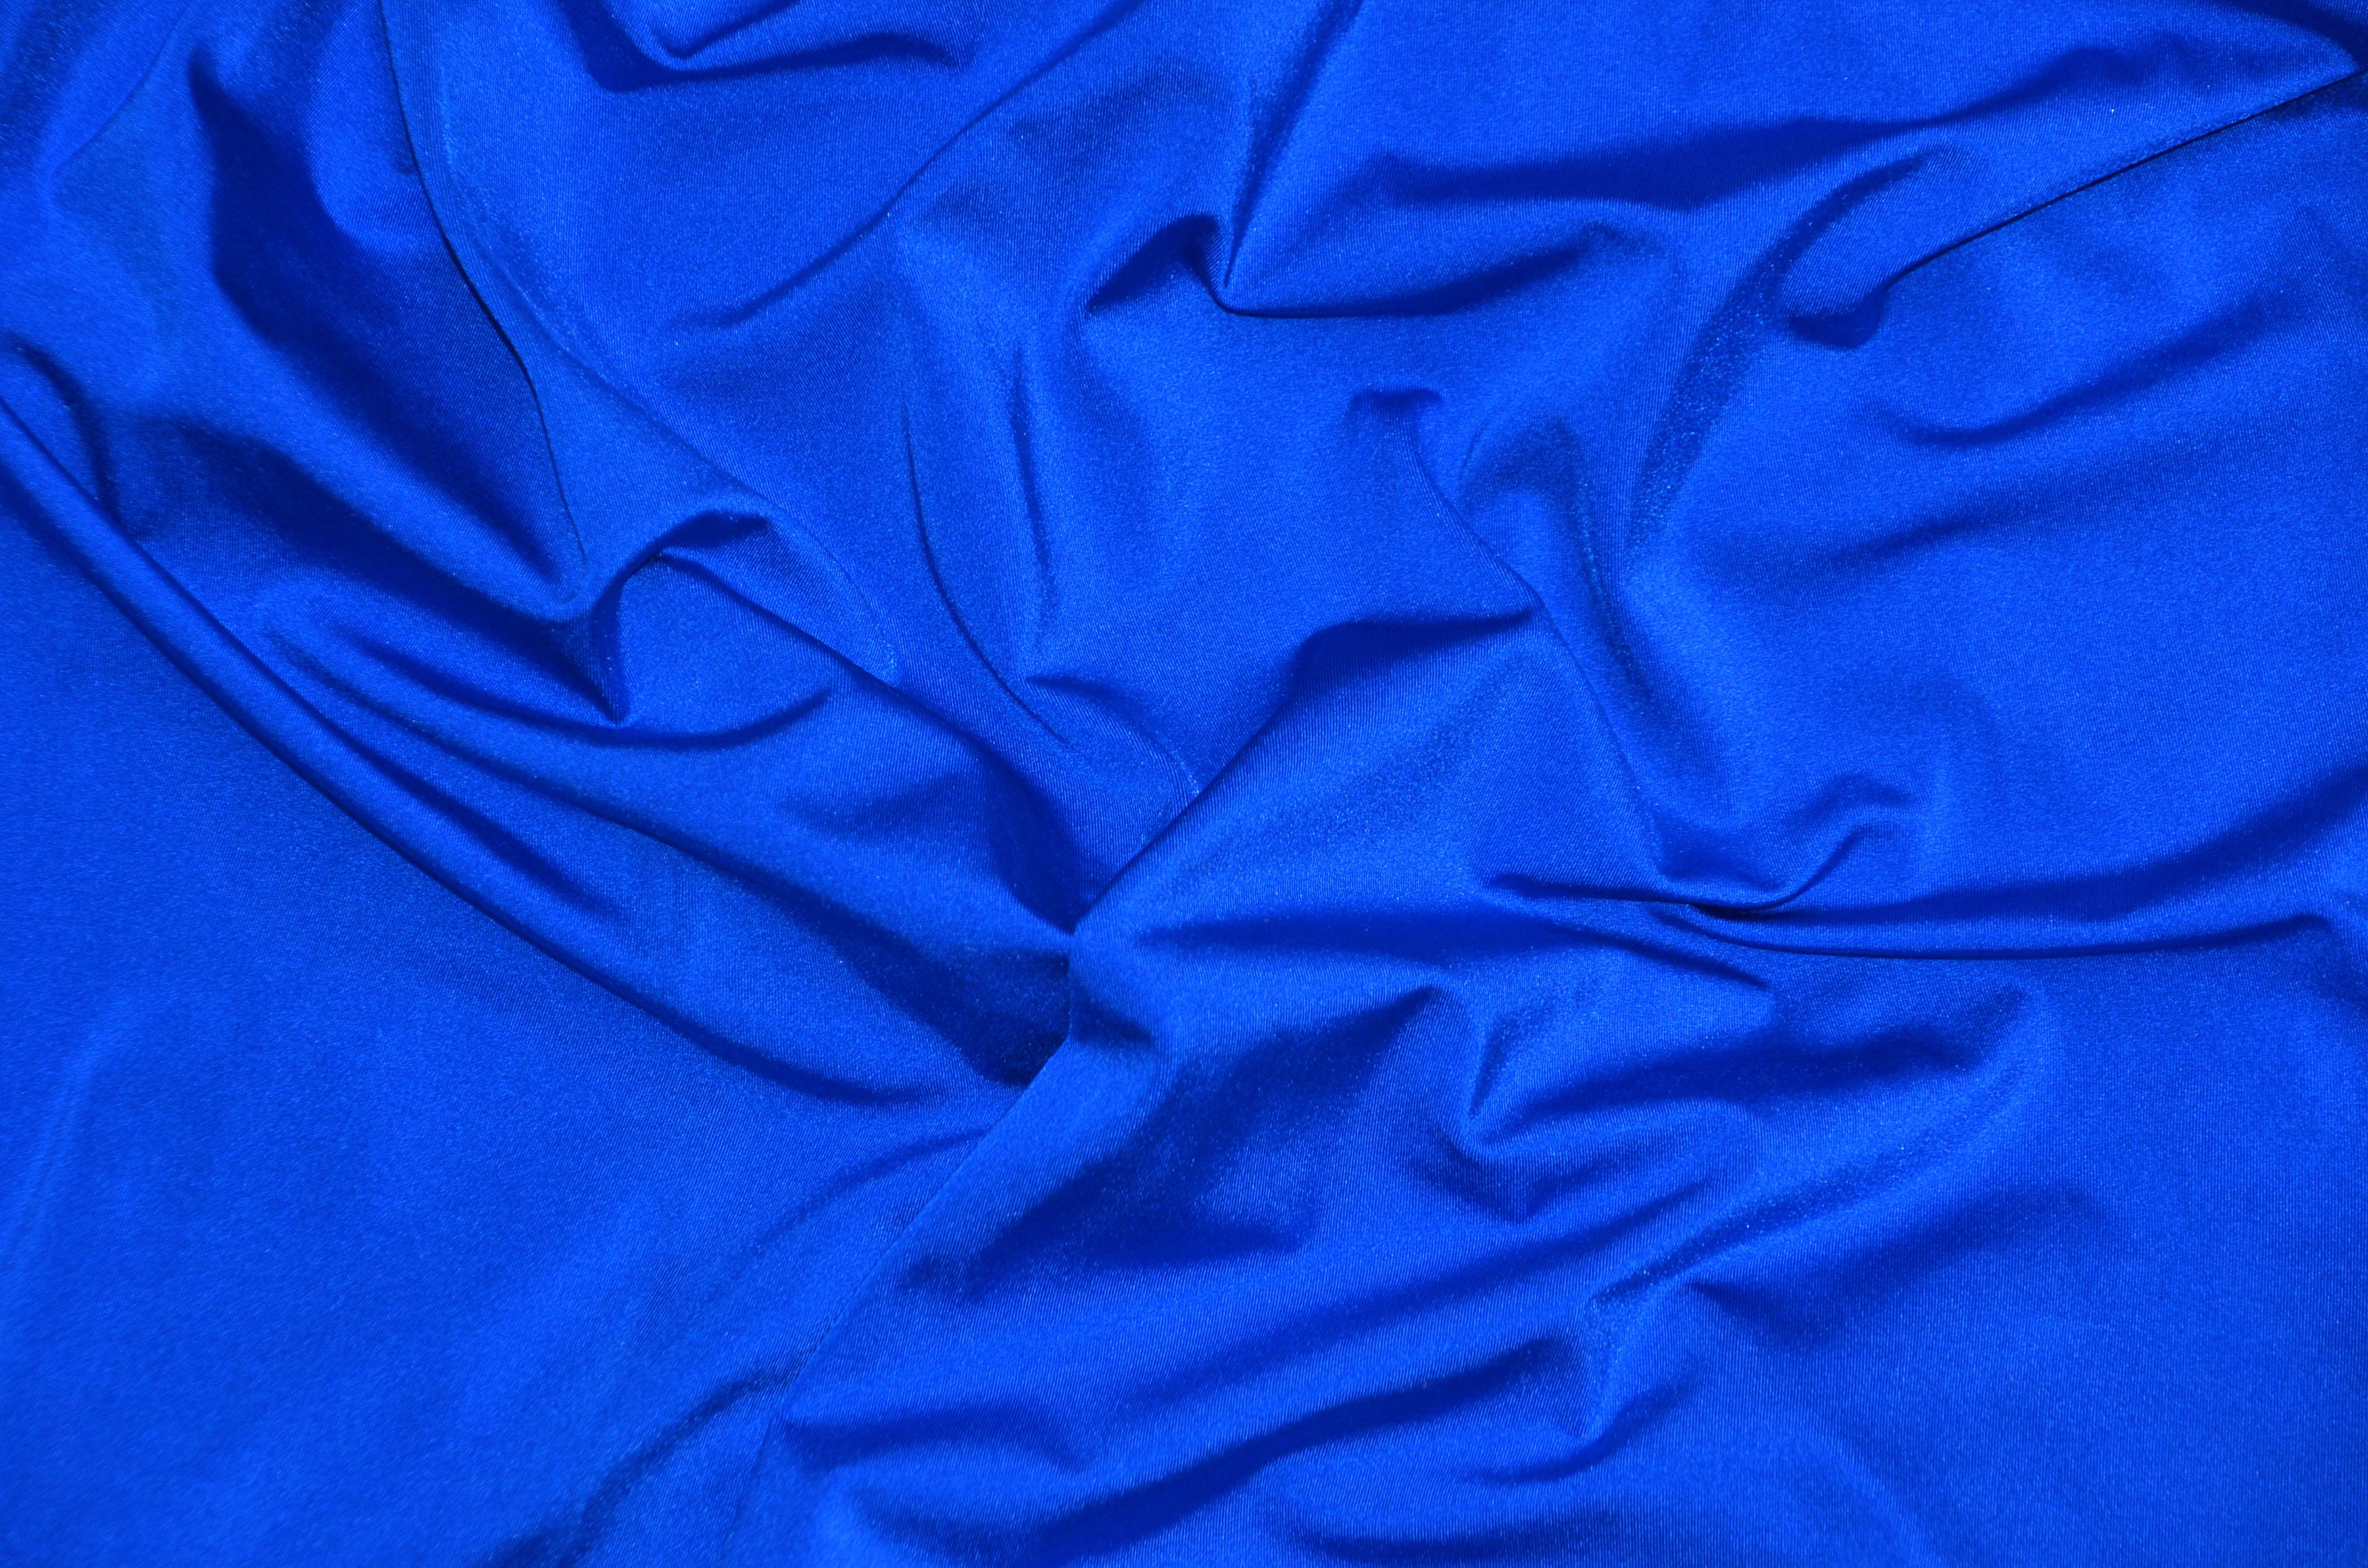 Royal Blue Nylon Spandex 4 Way Stretch Fabric by the Yard or Bolt Width is  58 Great for Swimwear, Outfits, and Any Active Wear 